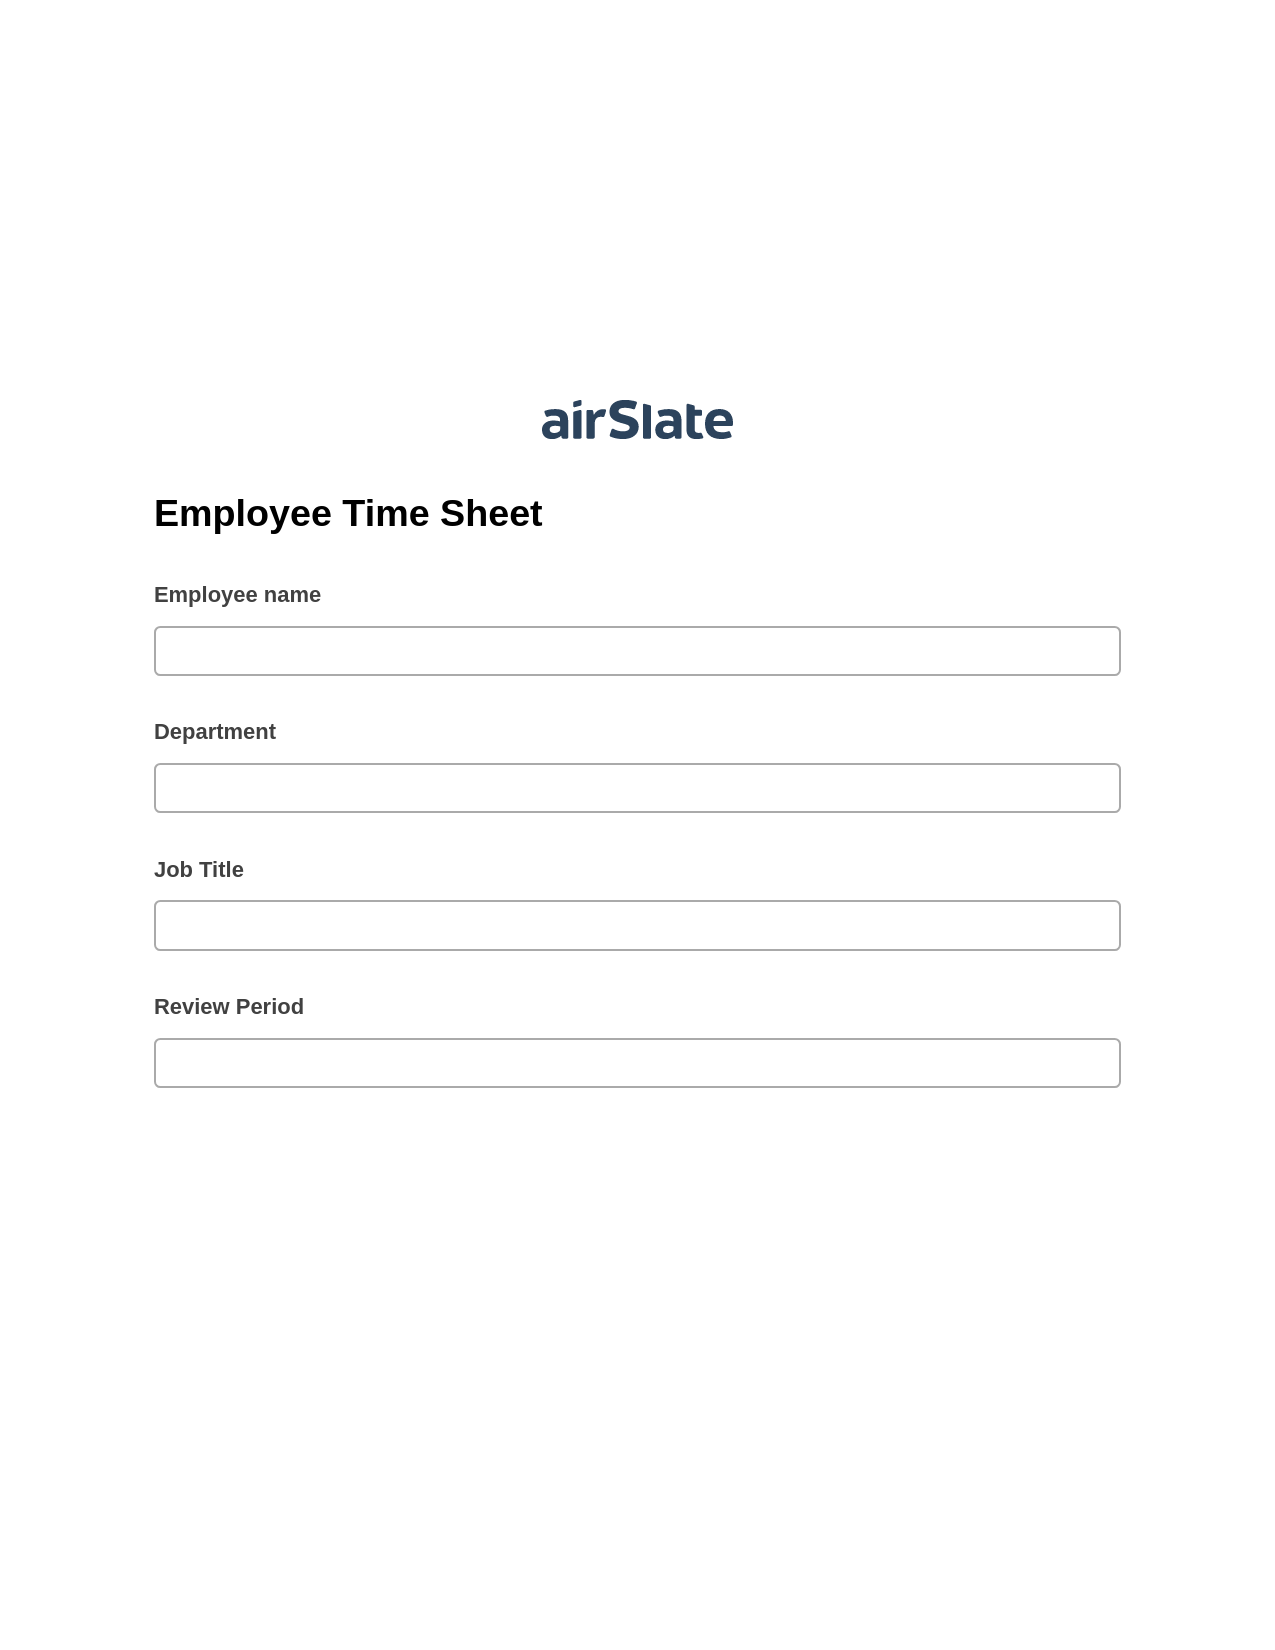 Multirole Employee Time Sheet Pre-fill from Office 365 Excel Bot, Unassign Role Bot, Export to NetSuite Bot